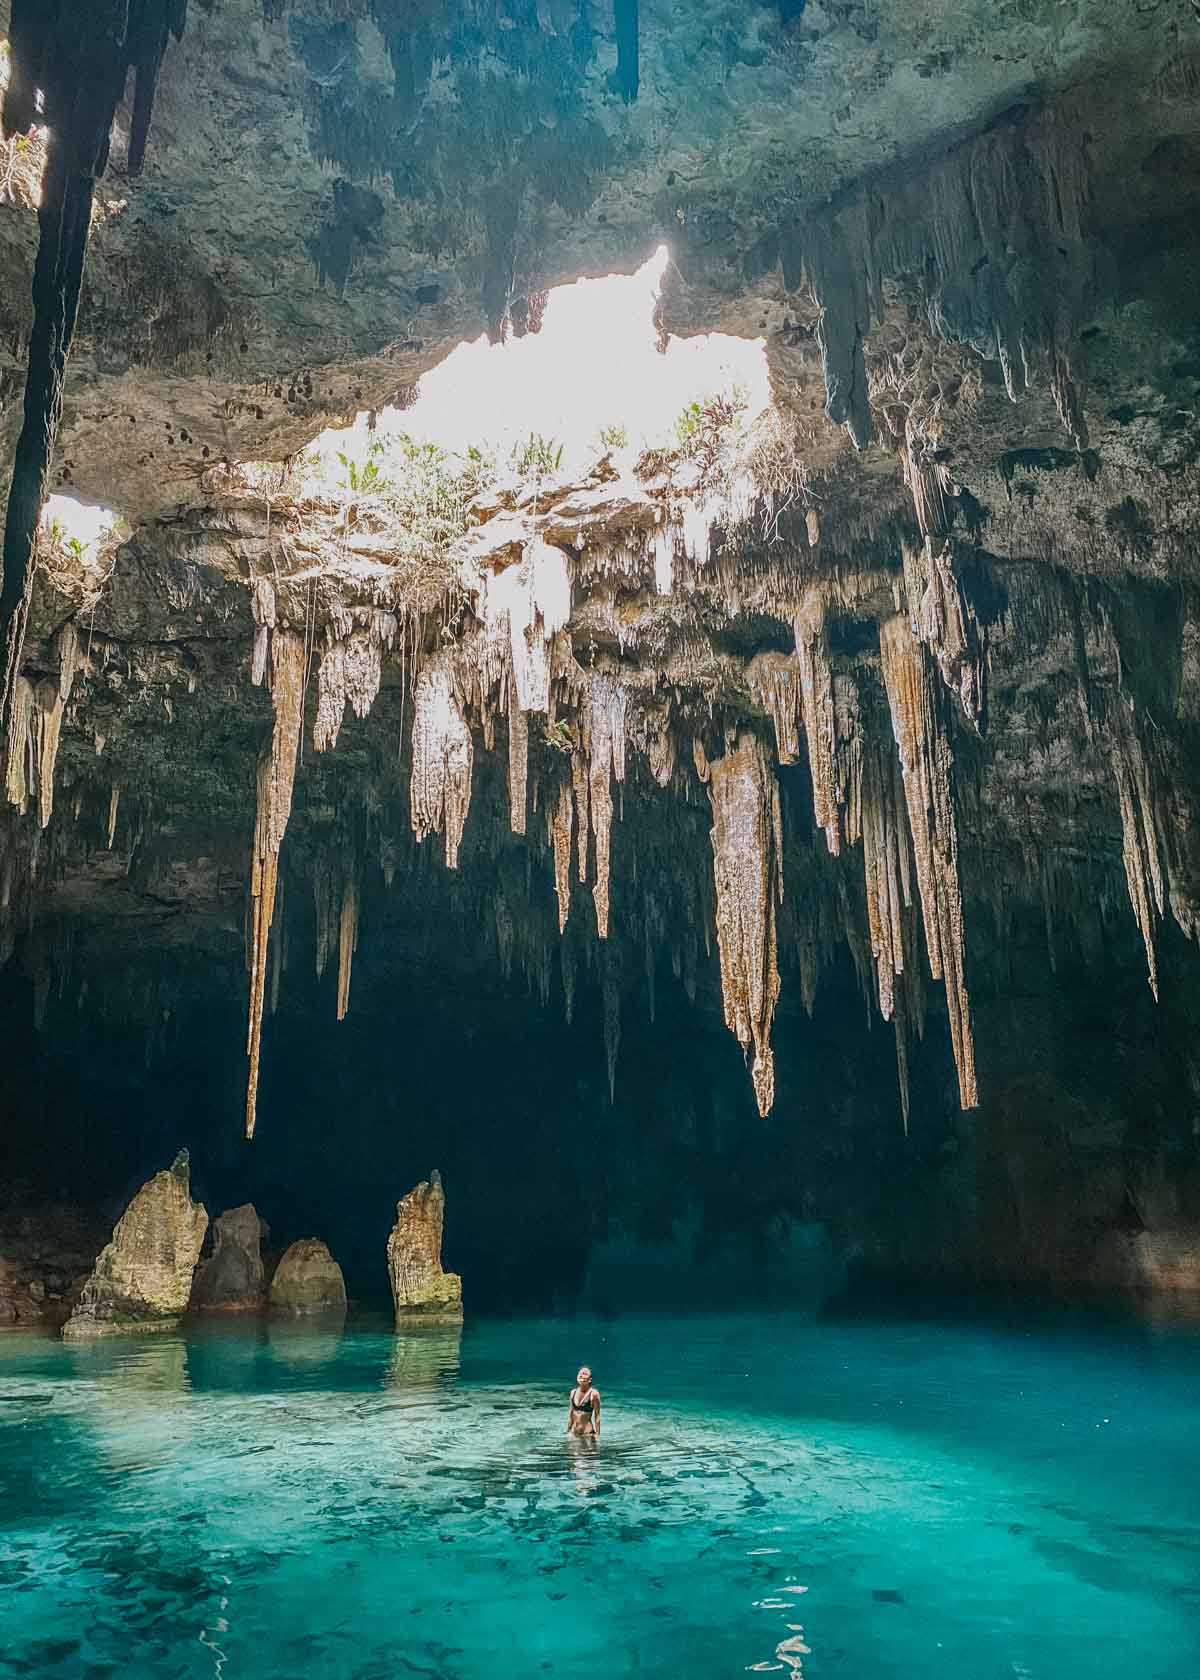 The Ultimate Guide to Cenote Xcanahaltun